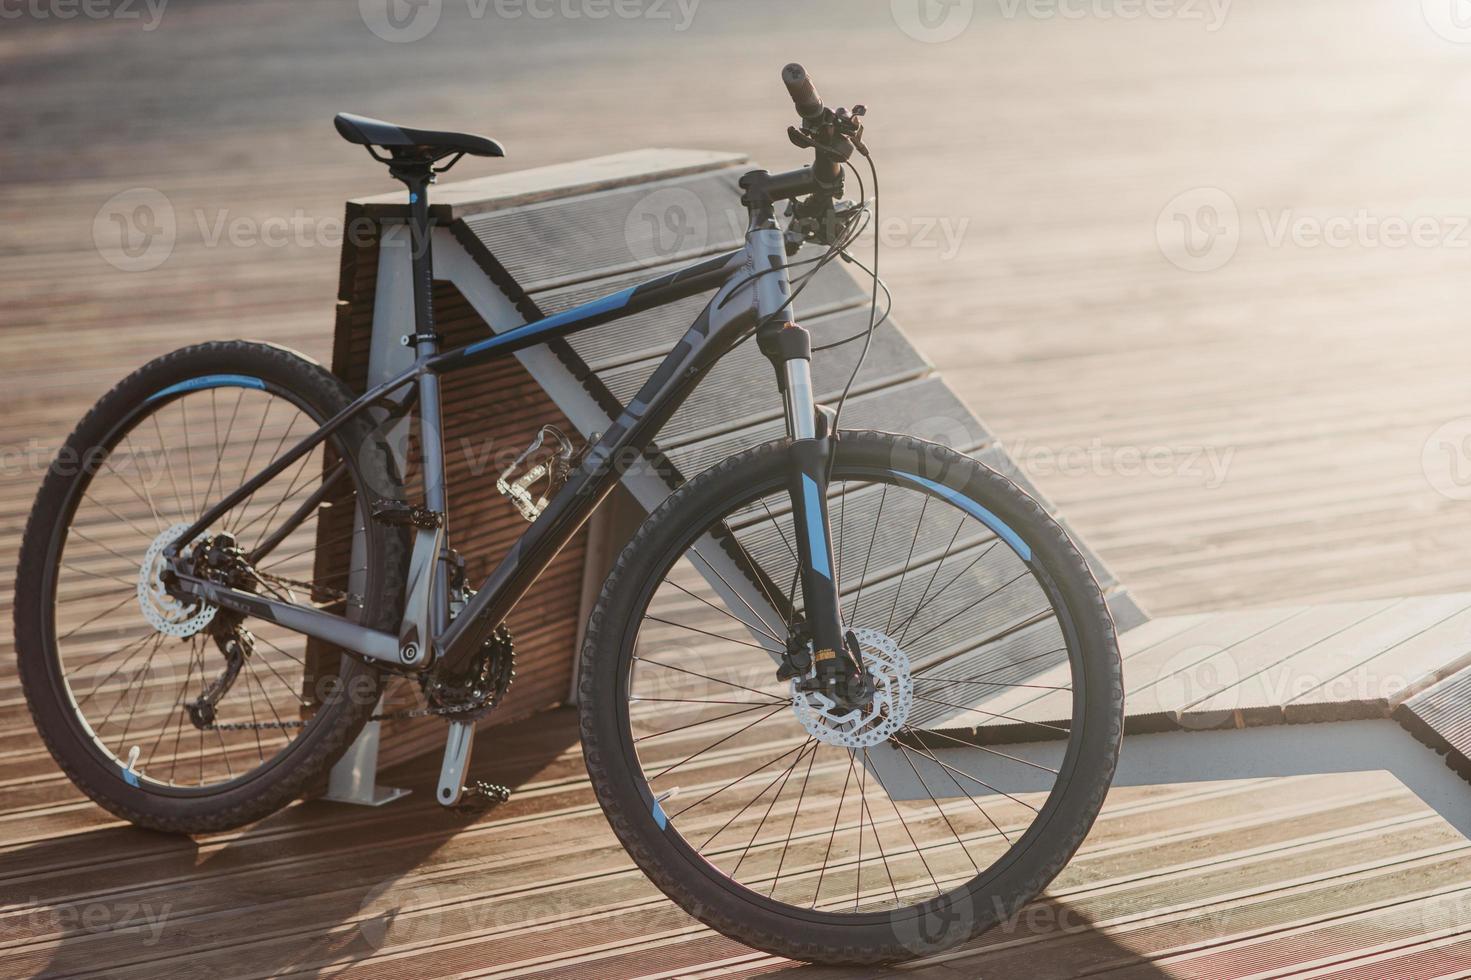 Sport bicycle outdoor for your travelling and adventures. Racing bike outside with no people. Cycling and ecological transportation concept. photo